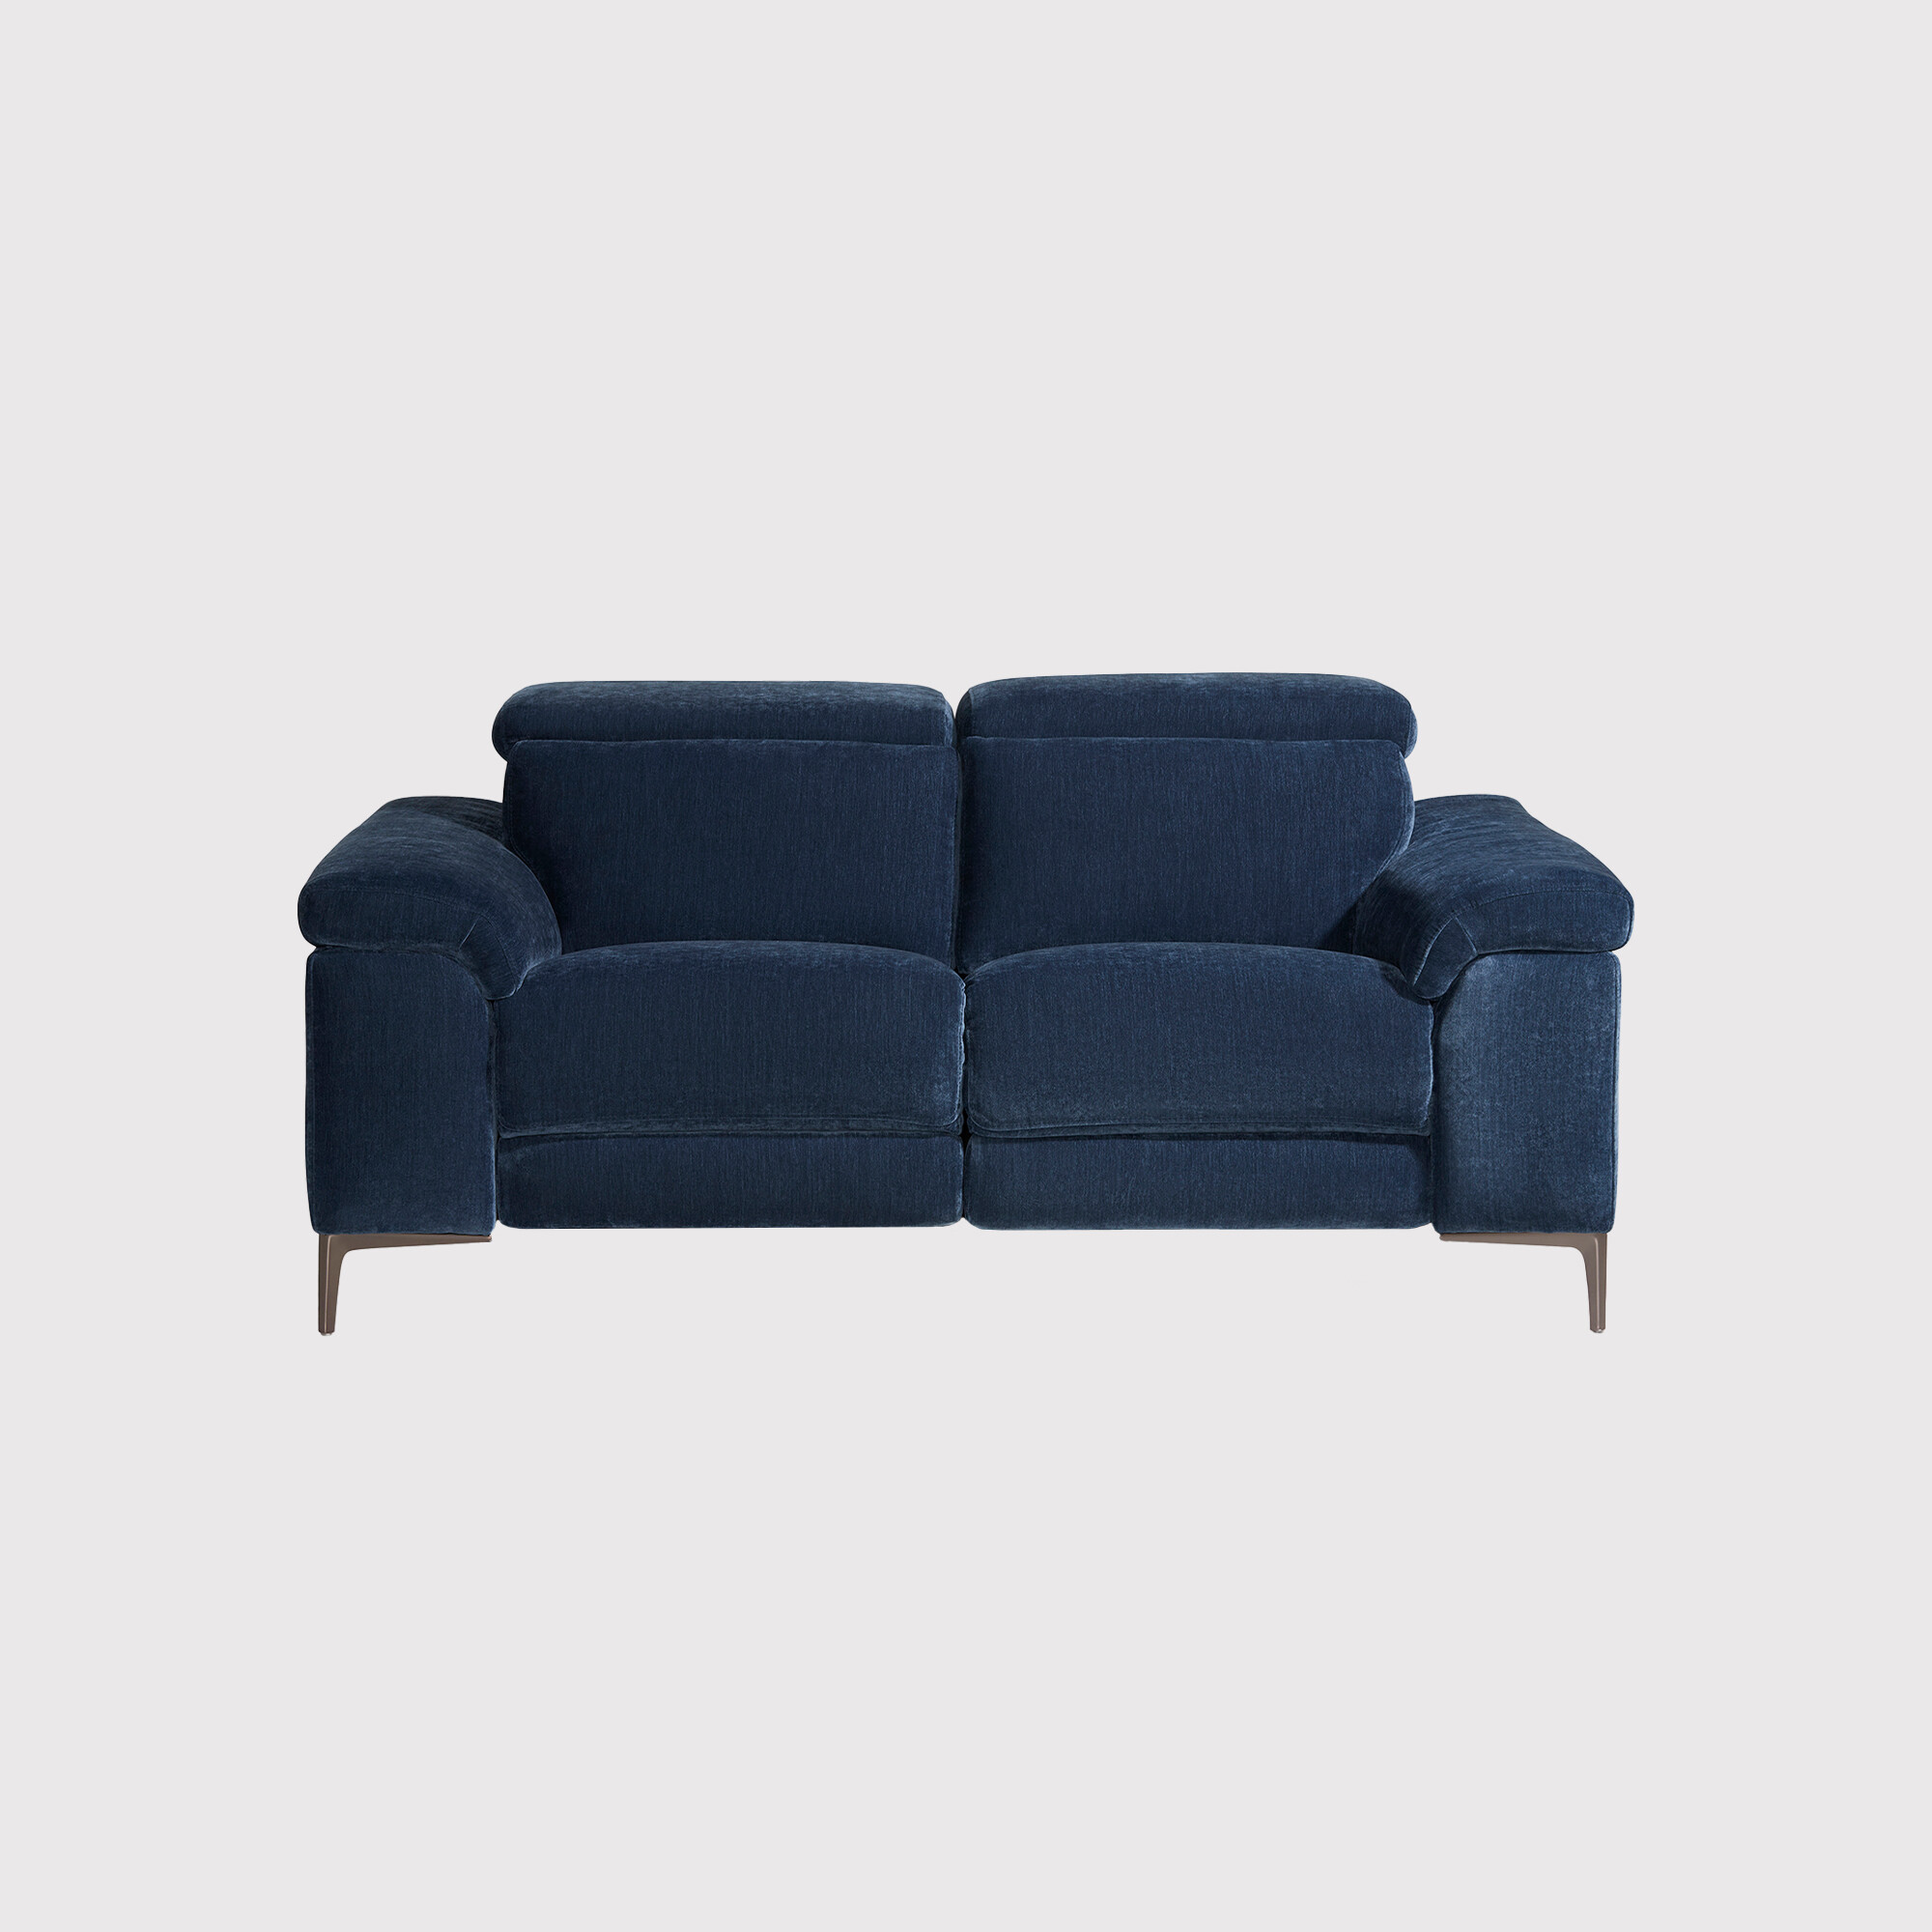 Paolo 2 Seater Recliner Sofa, Blue Fabric | Barker & Stonehouse